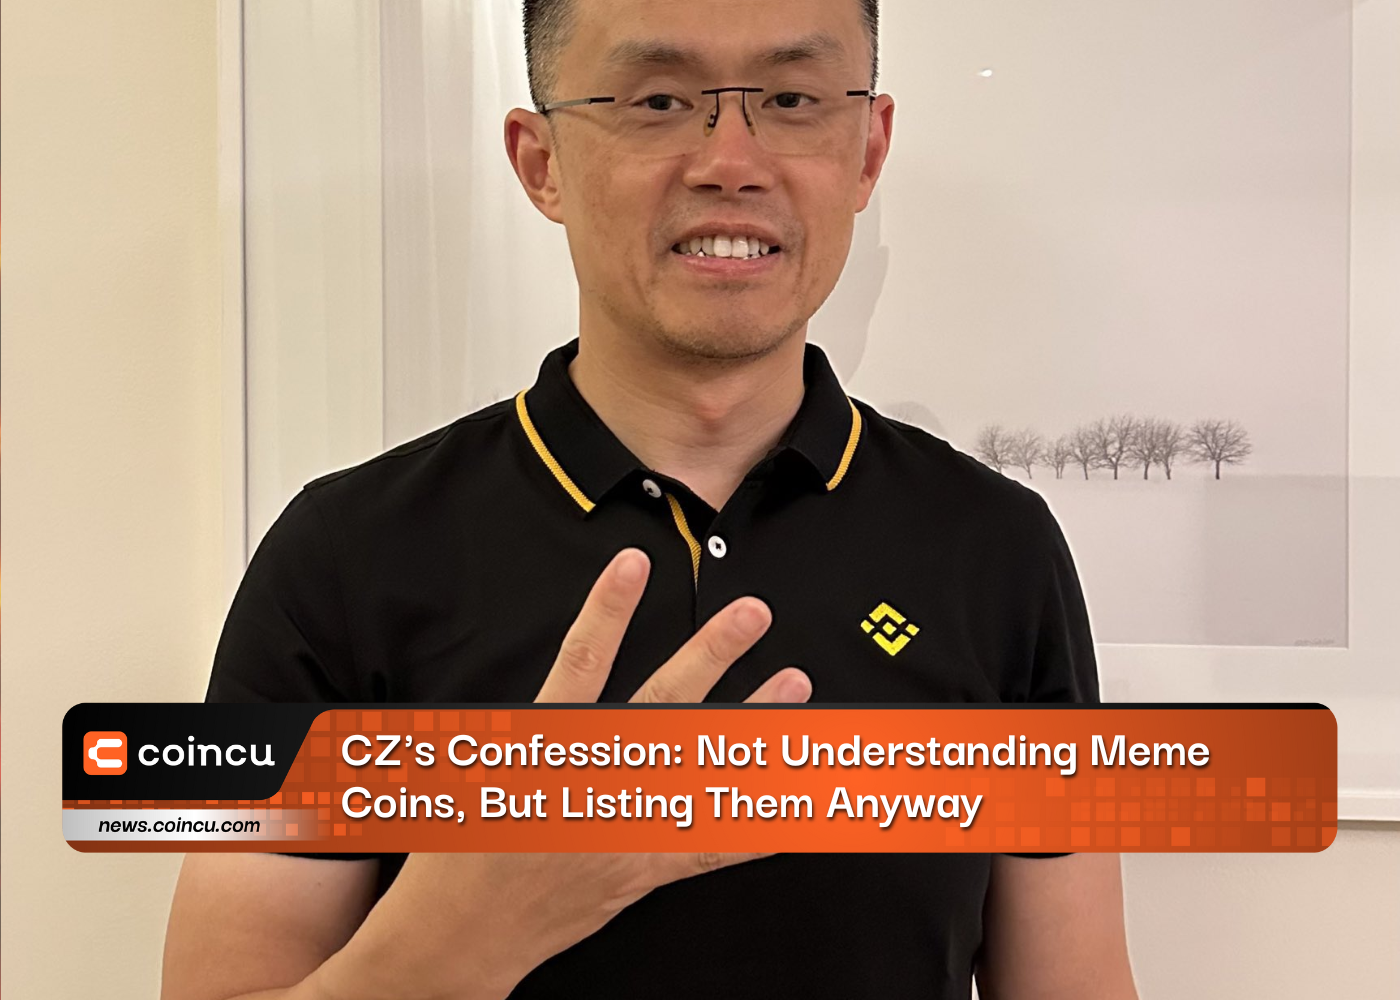 CZ's Confession: Not Understanding Meme Coins, But Listing Them Anyway